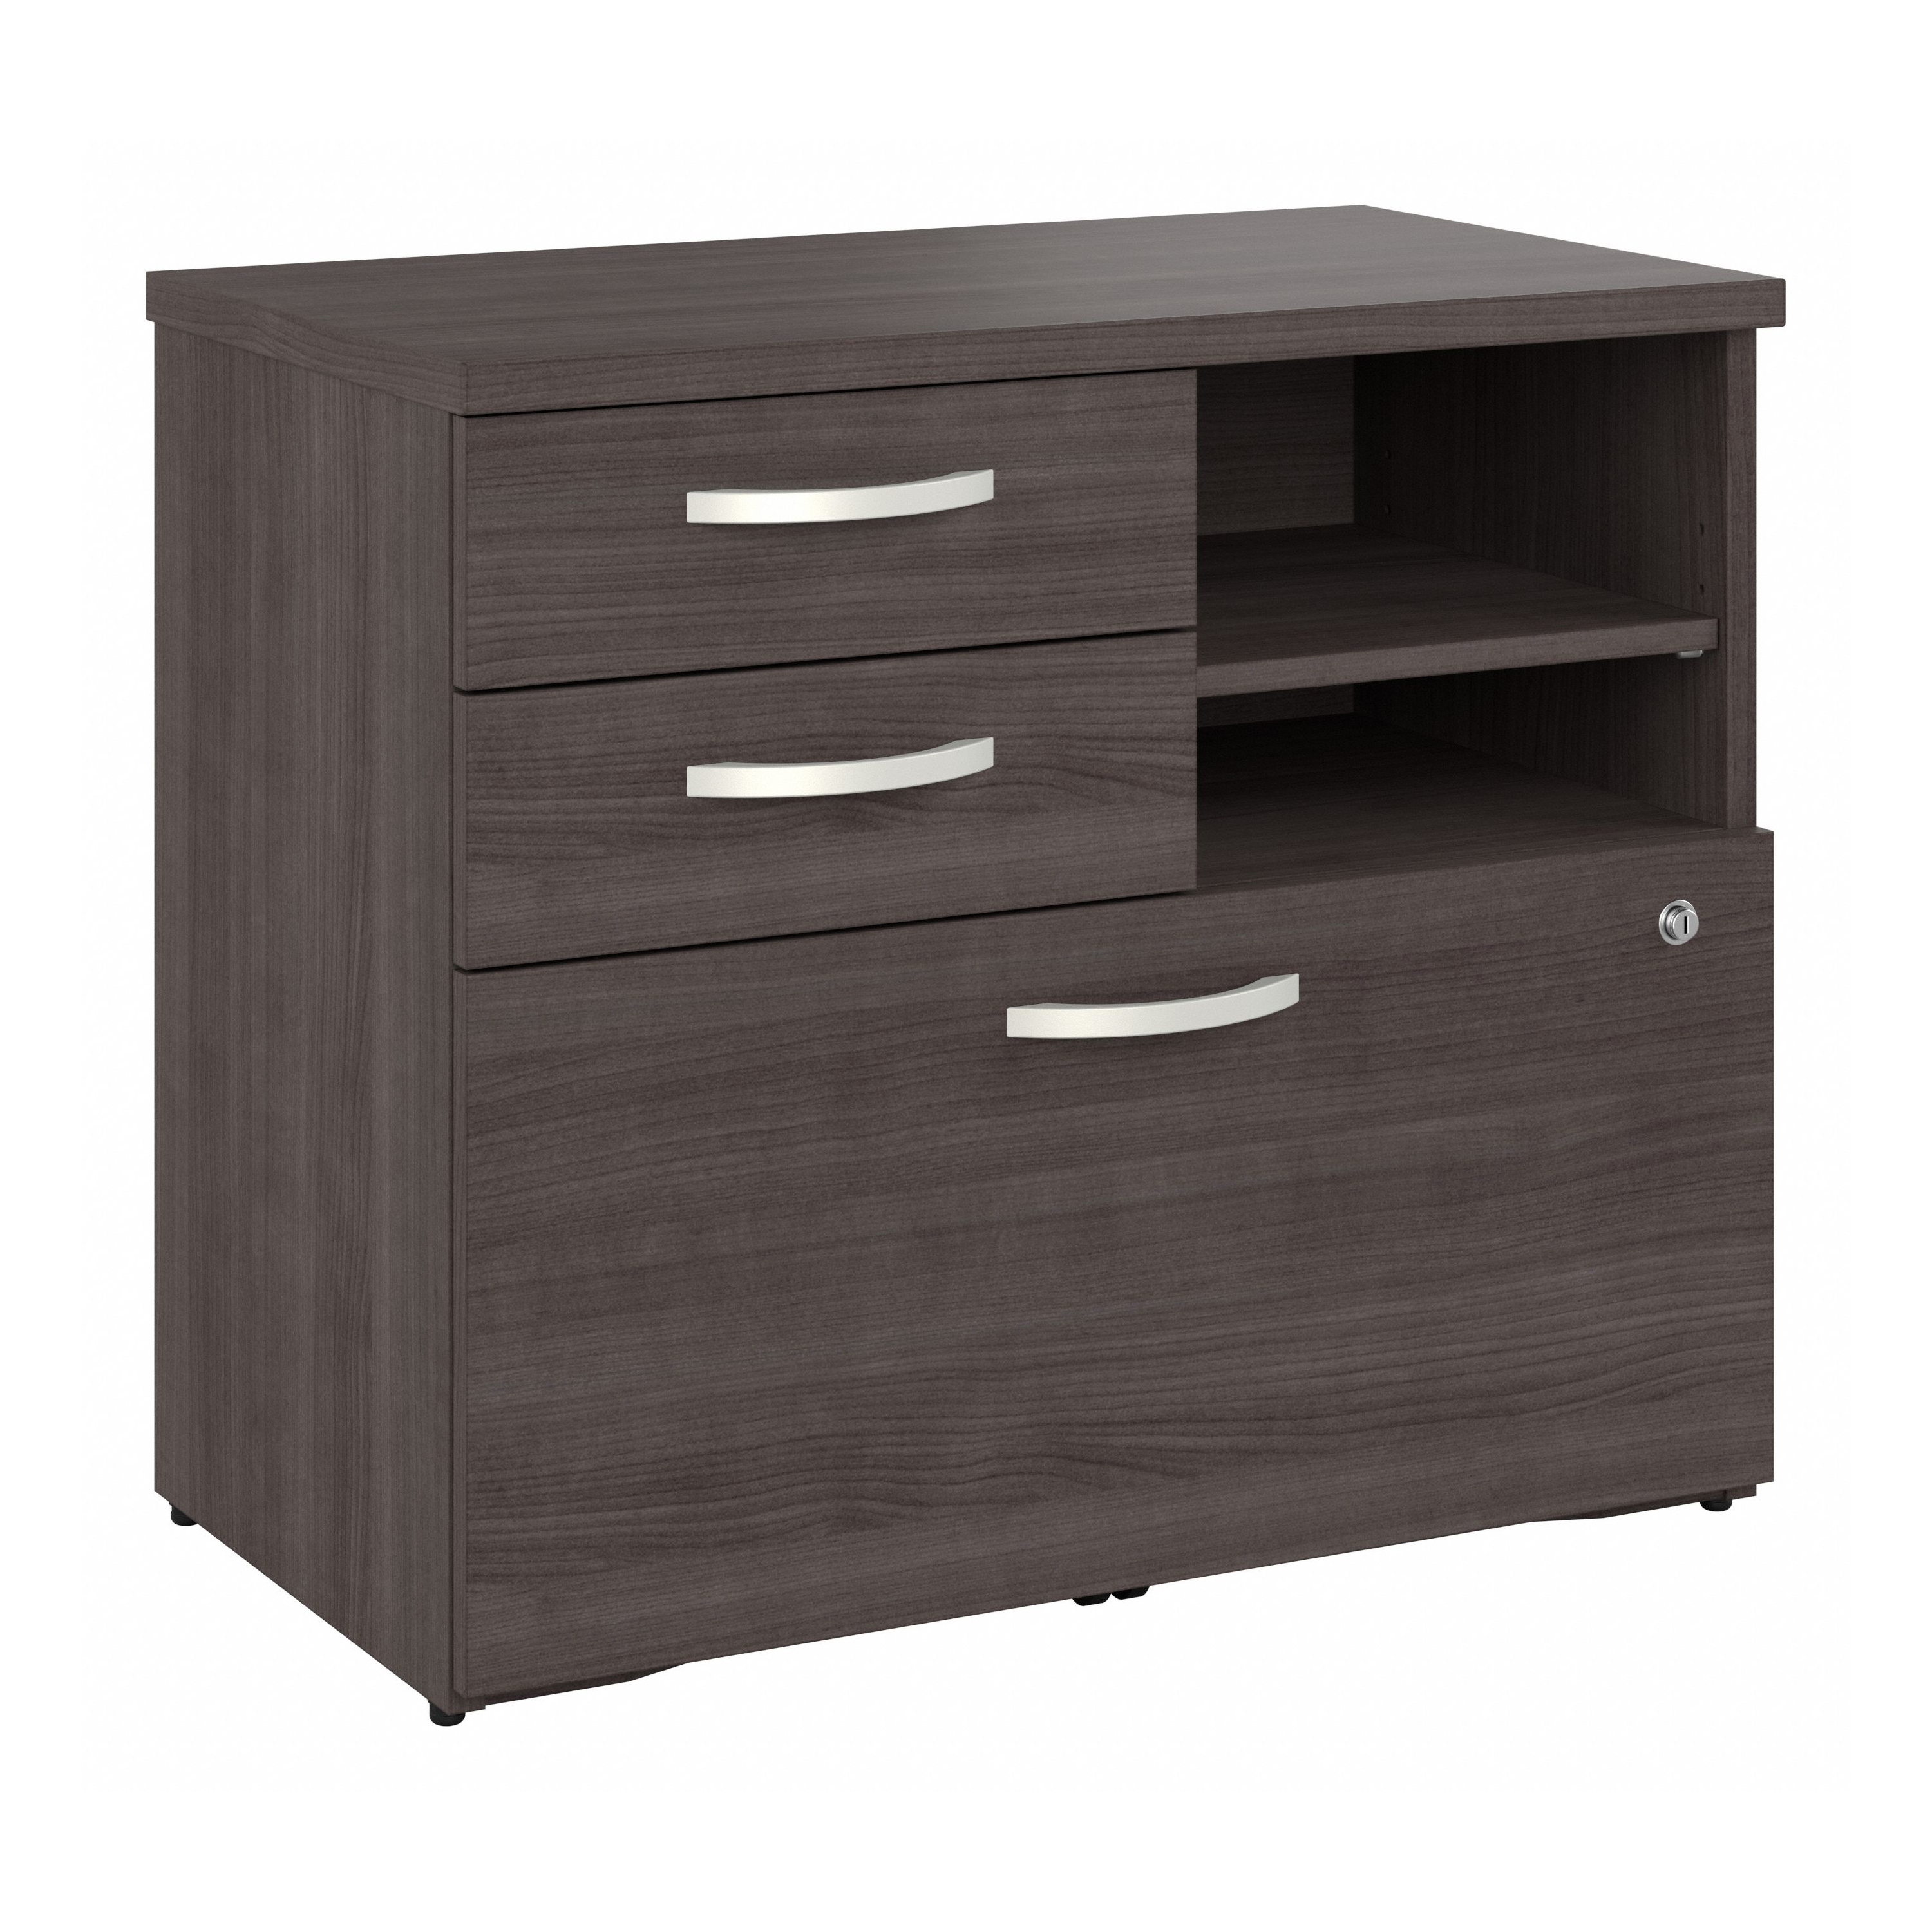 Shop Bush Business Furniture Studio A Office Storage Cabinet with Drawers and Shelves 02 SDF130SGSU-Z #color_storm gray